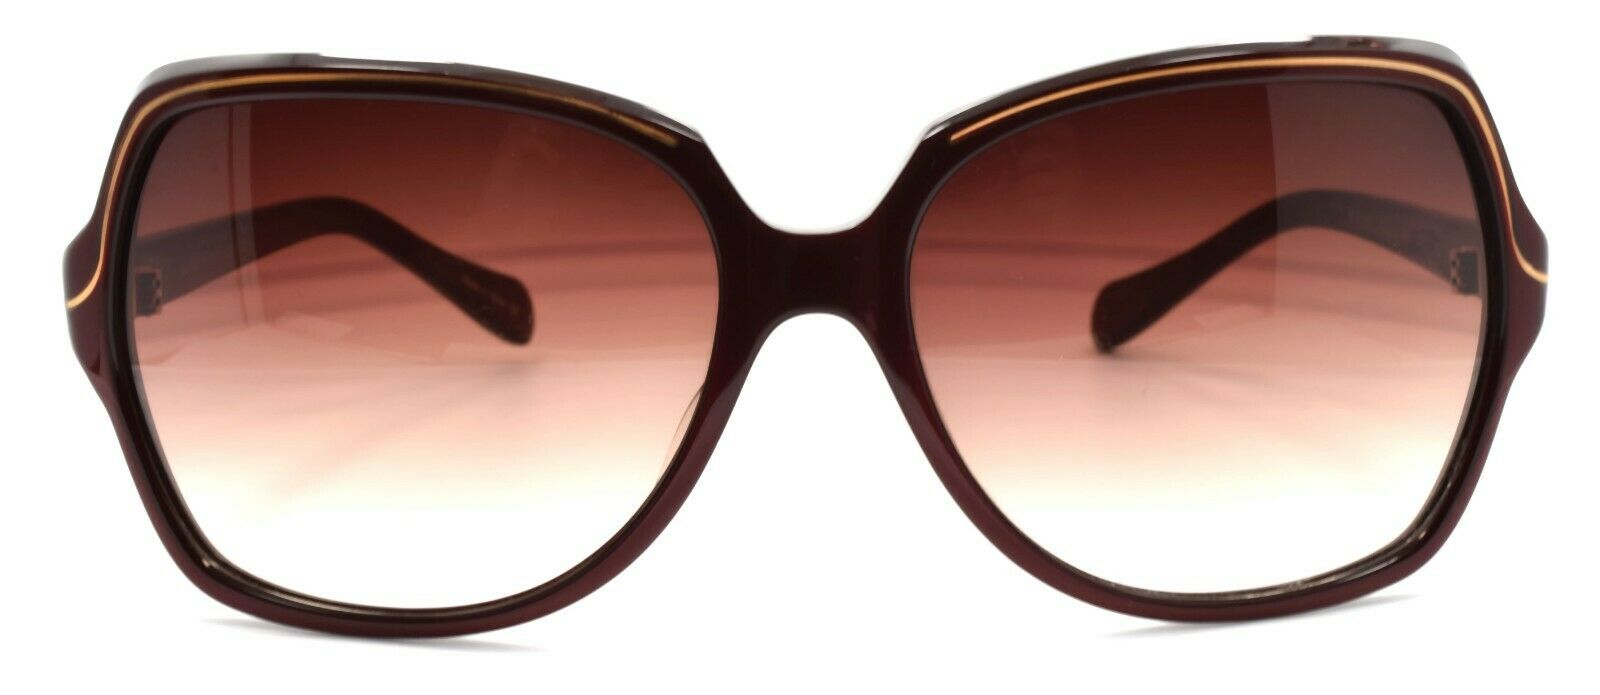 2-Oliver Peoples OV 5114-S 1065/13 Ilana Sunglasses Glossy Dark Red 61 mm JAPAN-Does not apply-IKSpecs